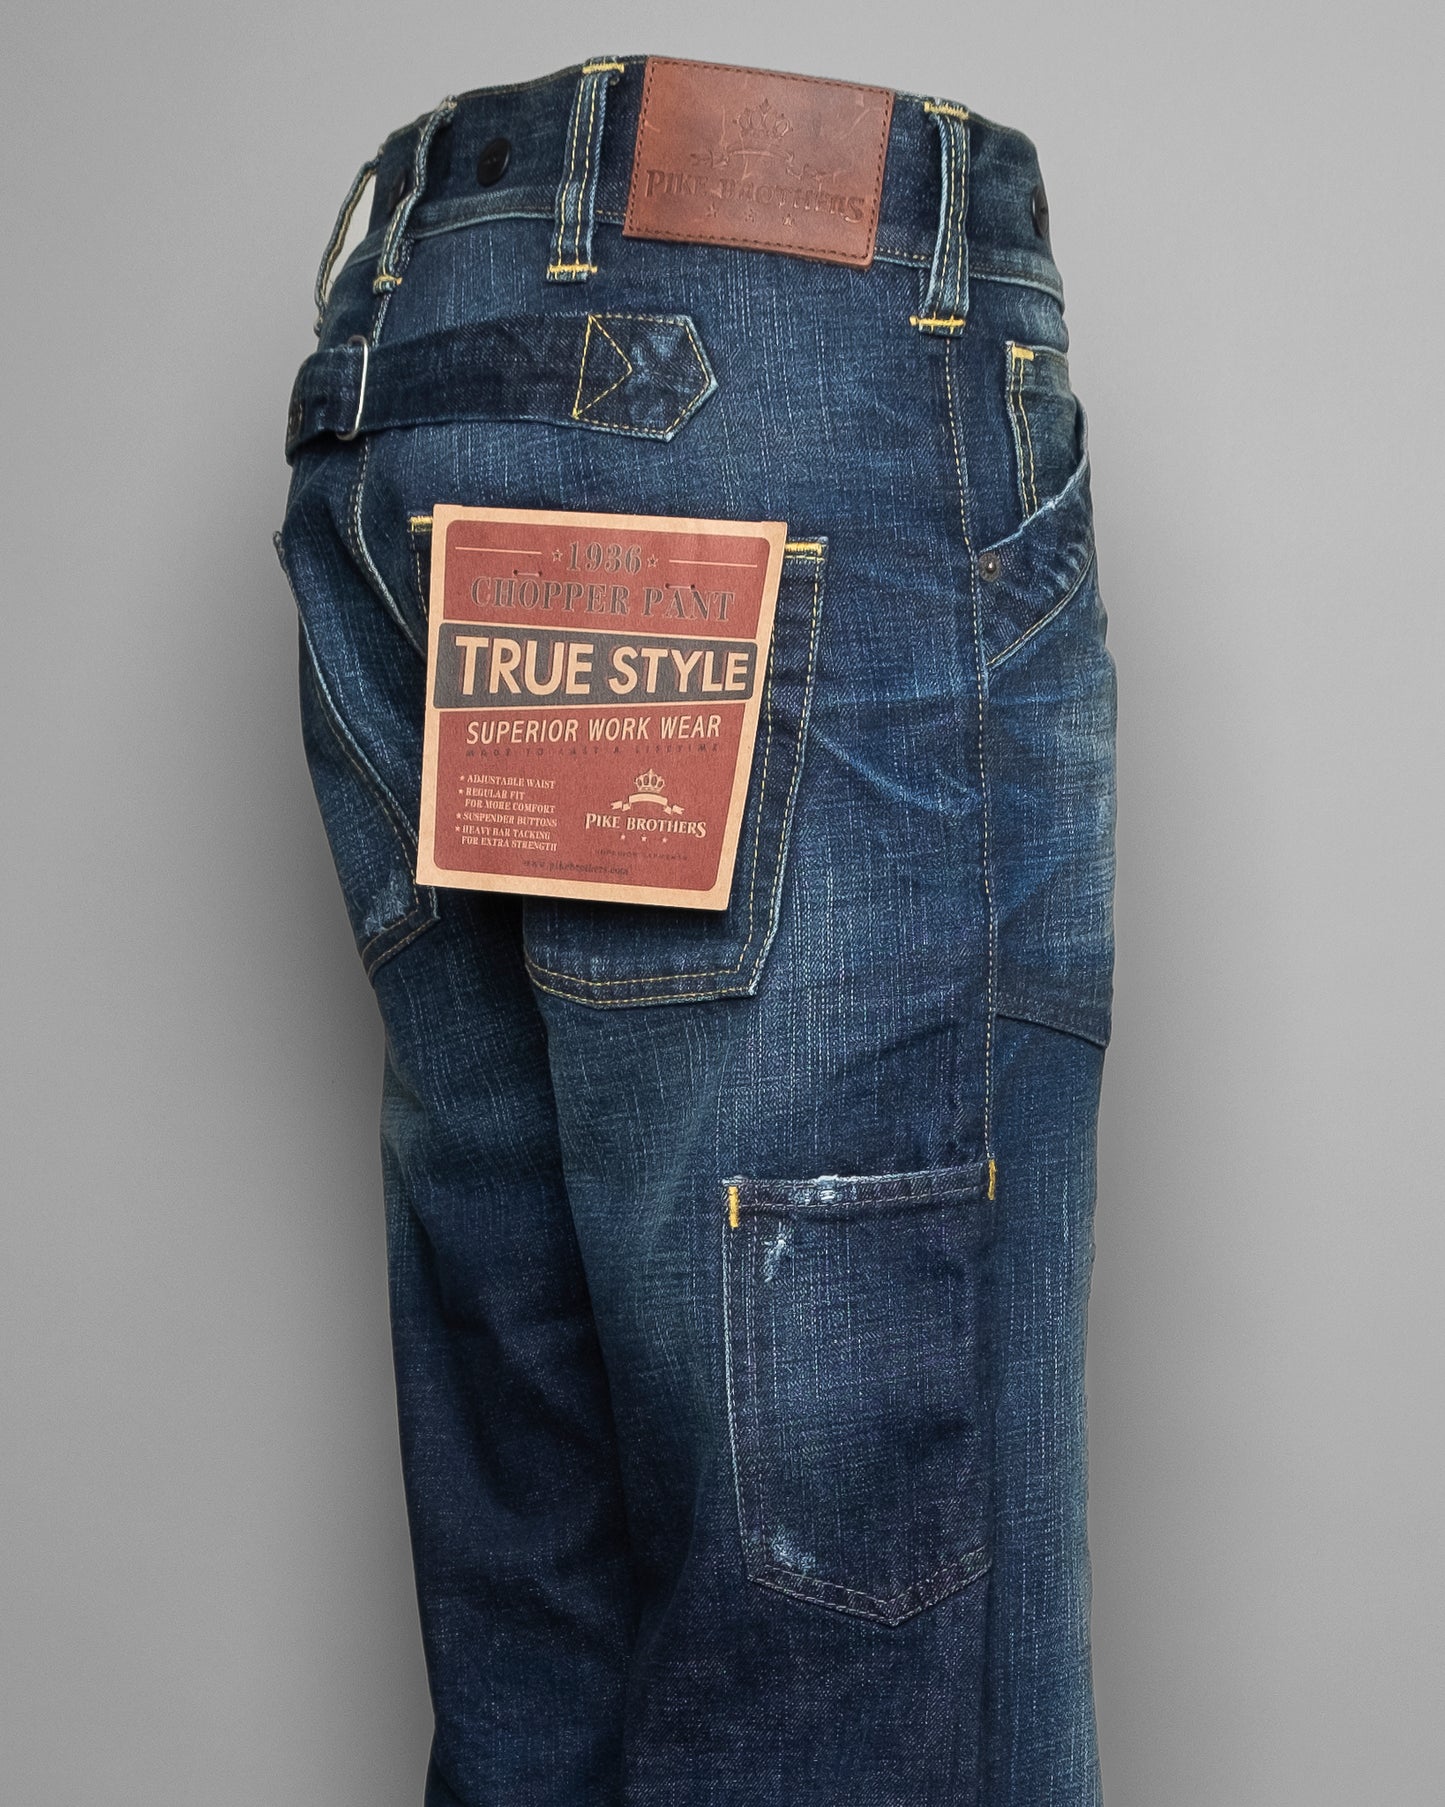 PIKE BROTHERS - 1936 CHOPPER PANT 15oz 206 RINSE